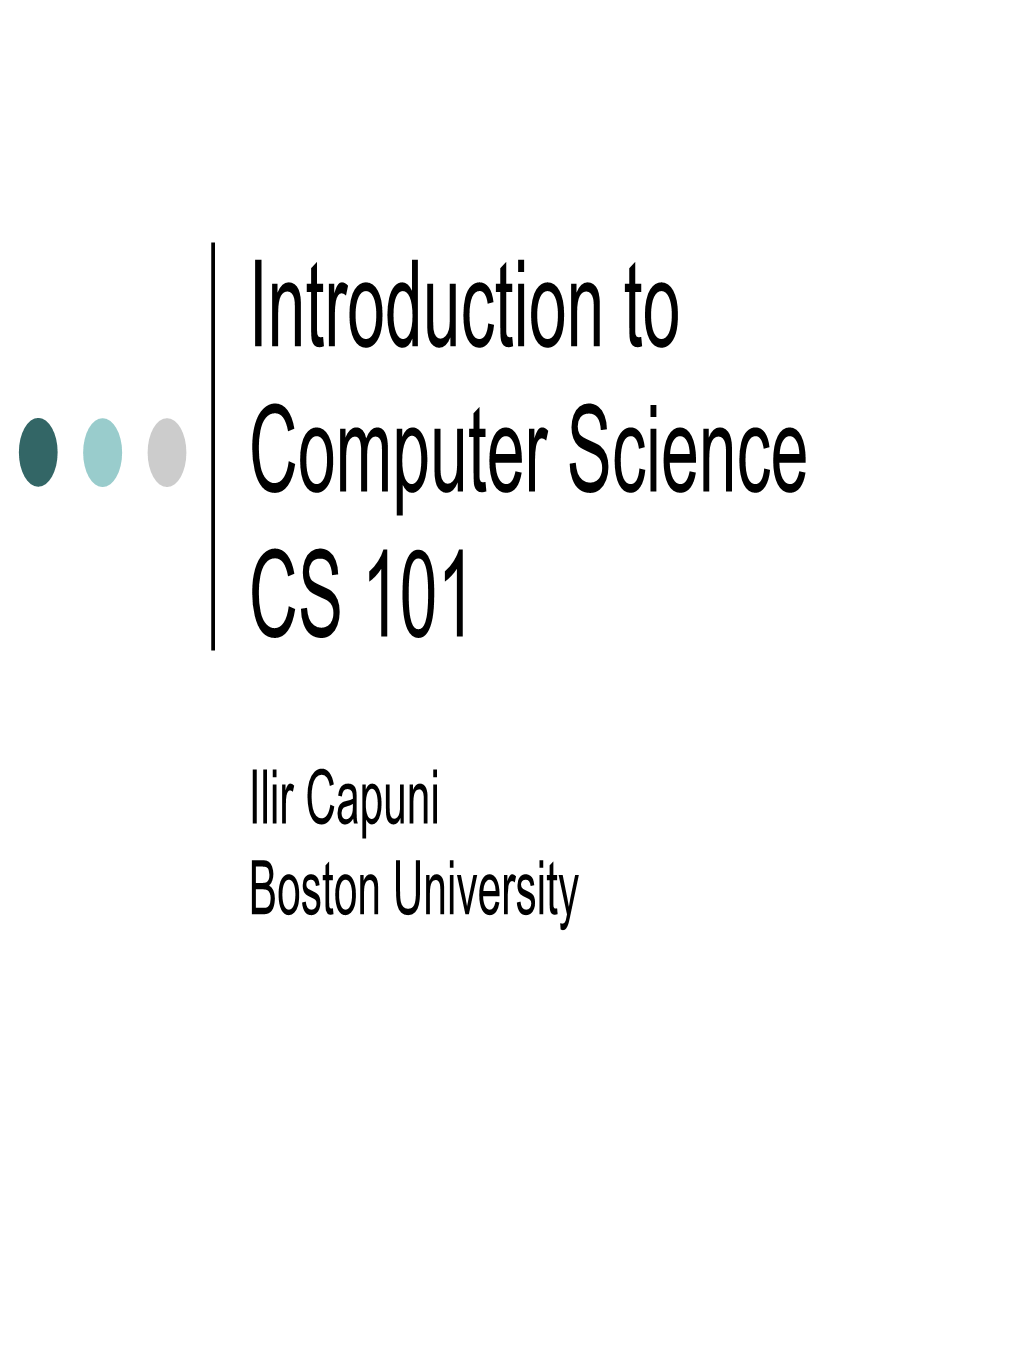 Introduction to Computer Science CS 101